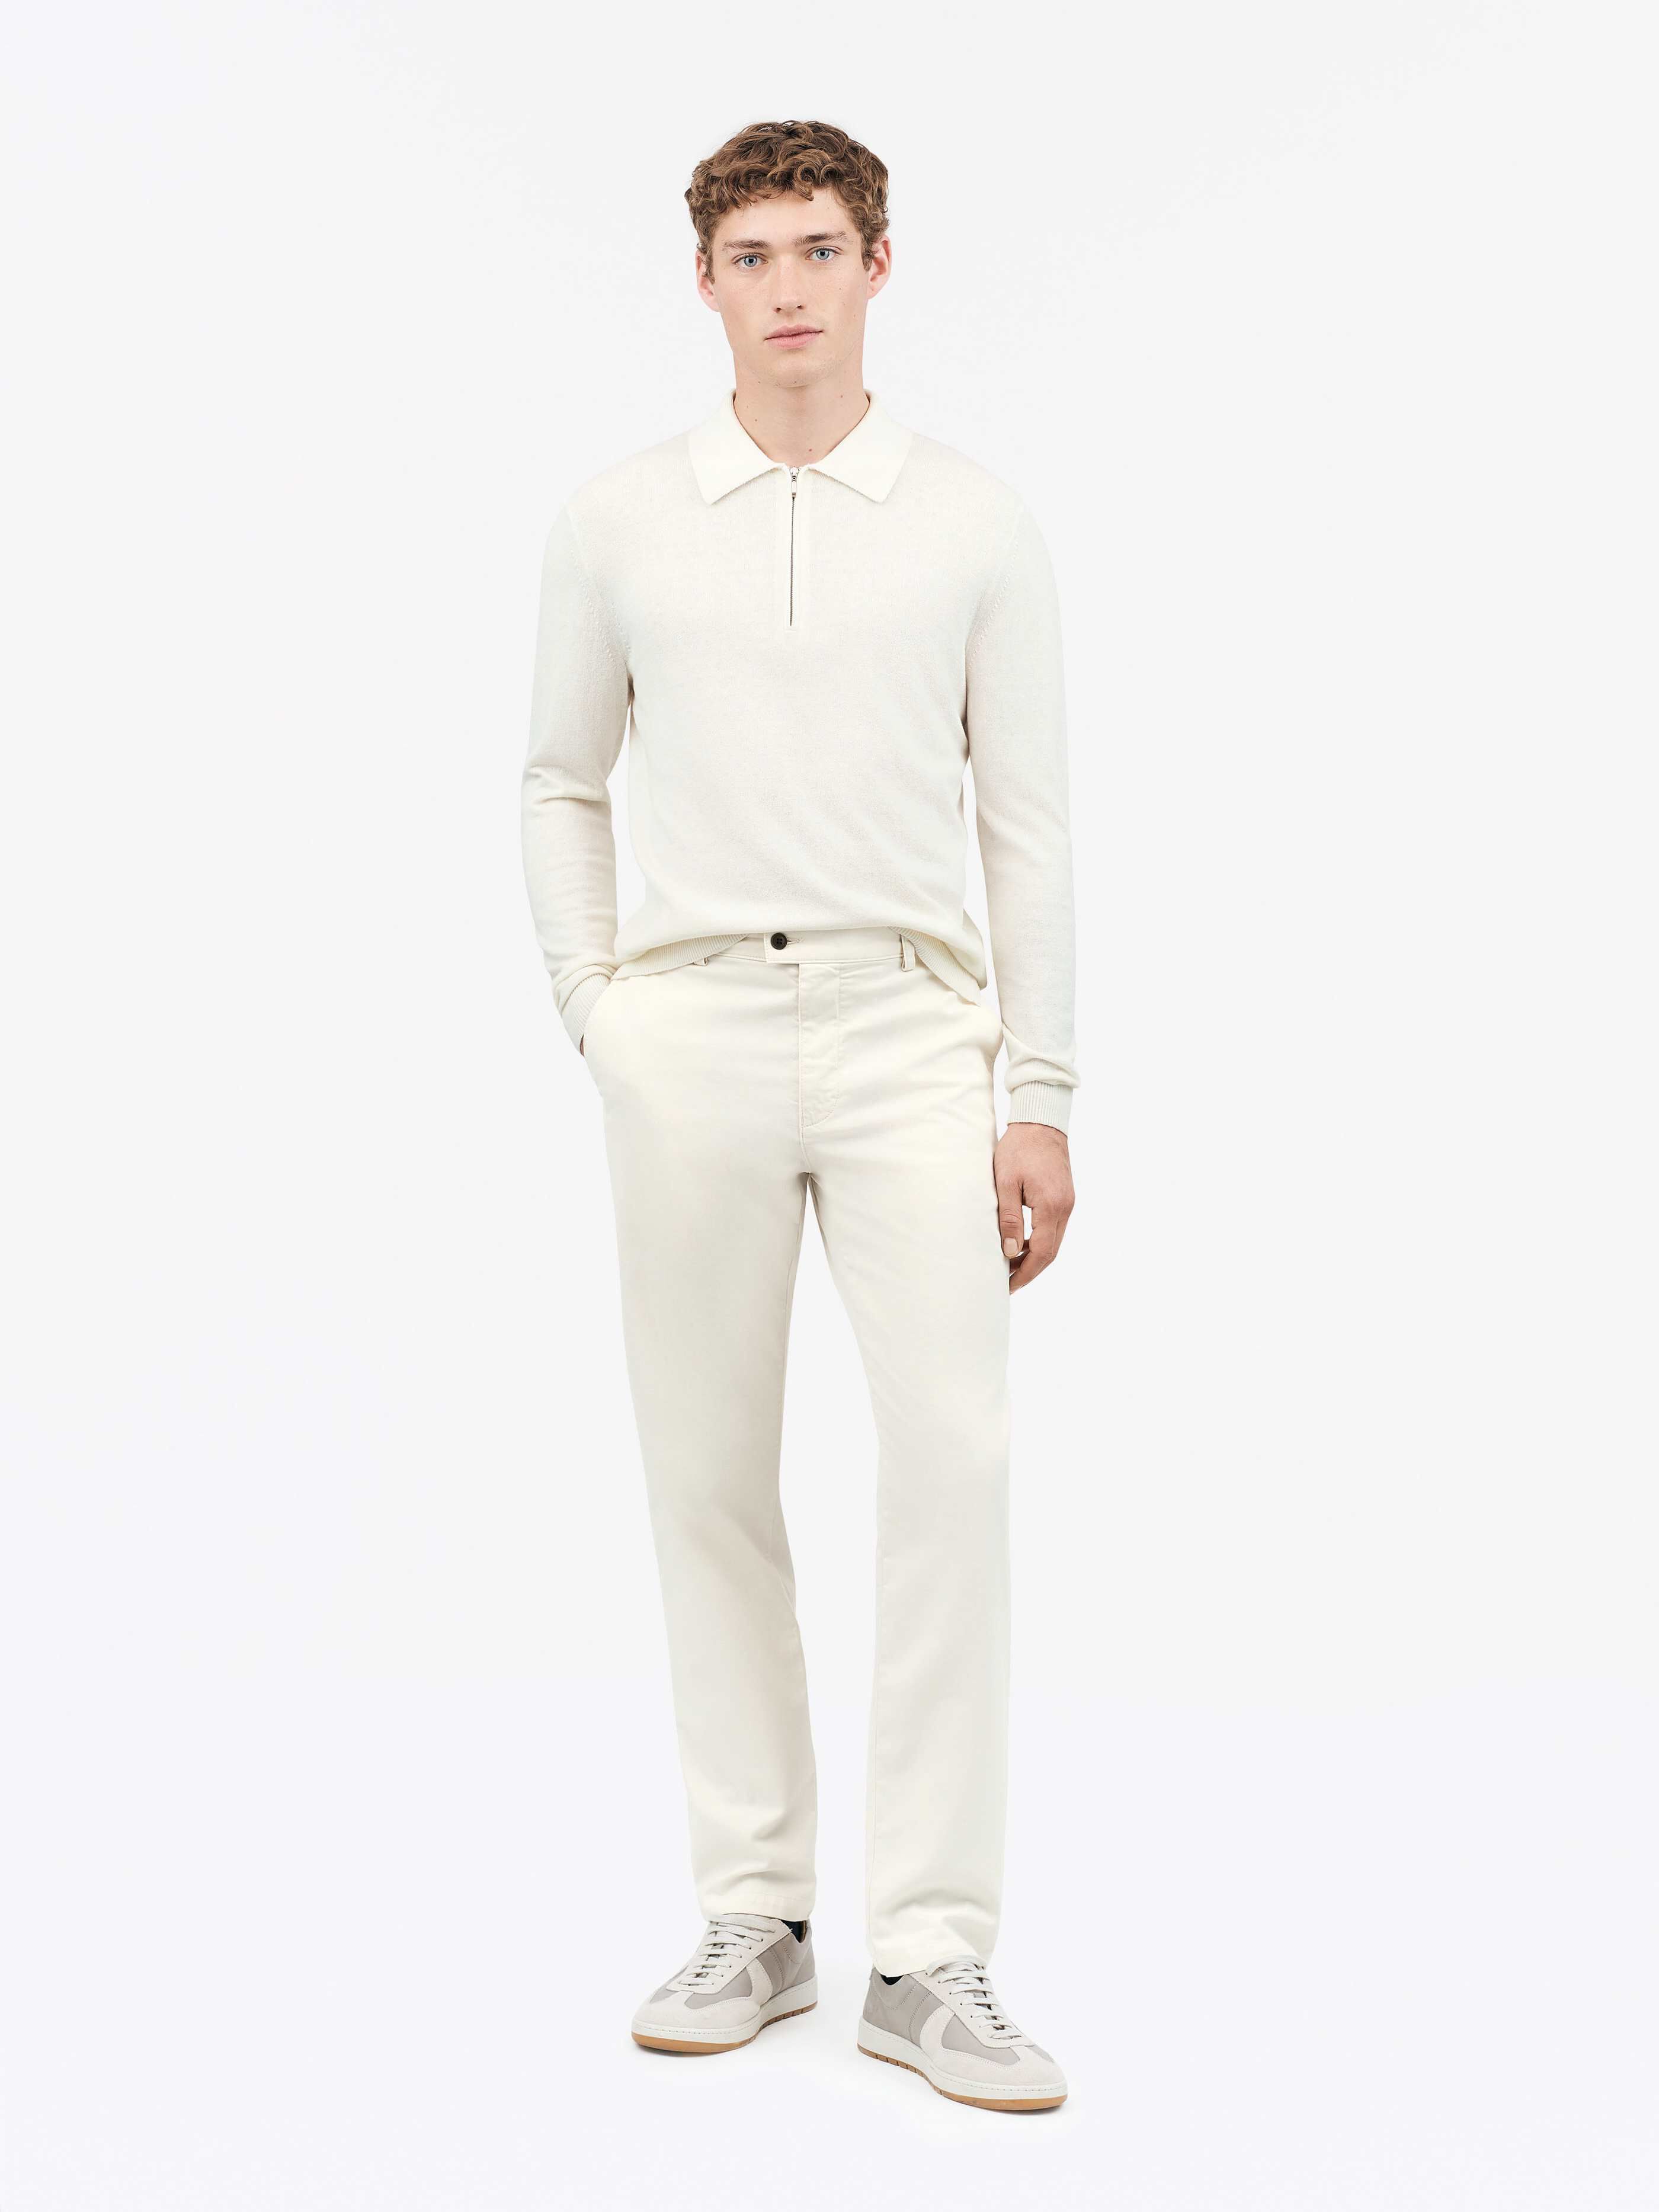 TIGER OF SWEDEN Caidon Pants in White T67555025 | Shop from eightywingold an official brand partner for Tiger of Sweden Canada and US.